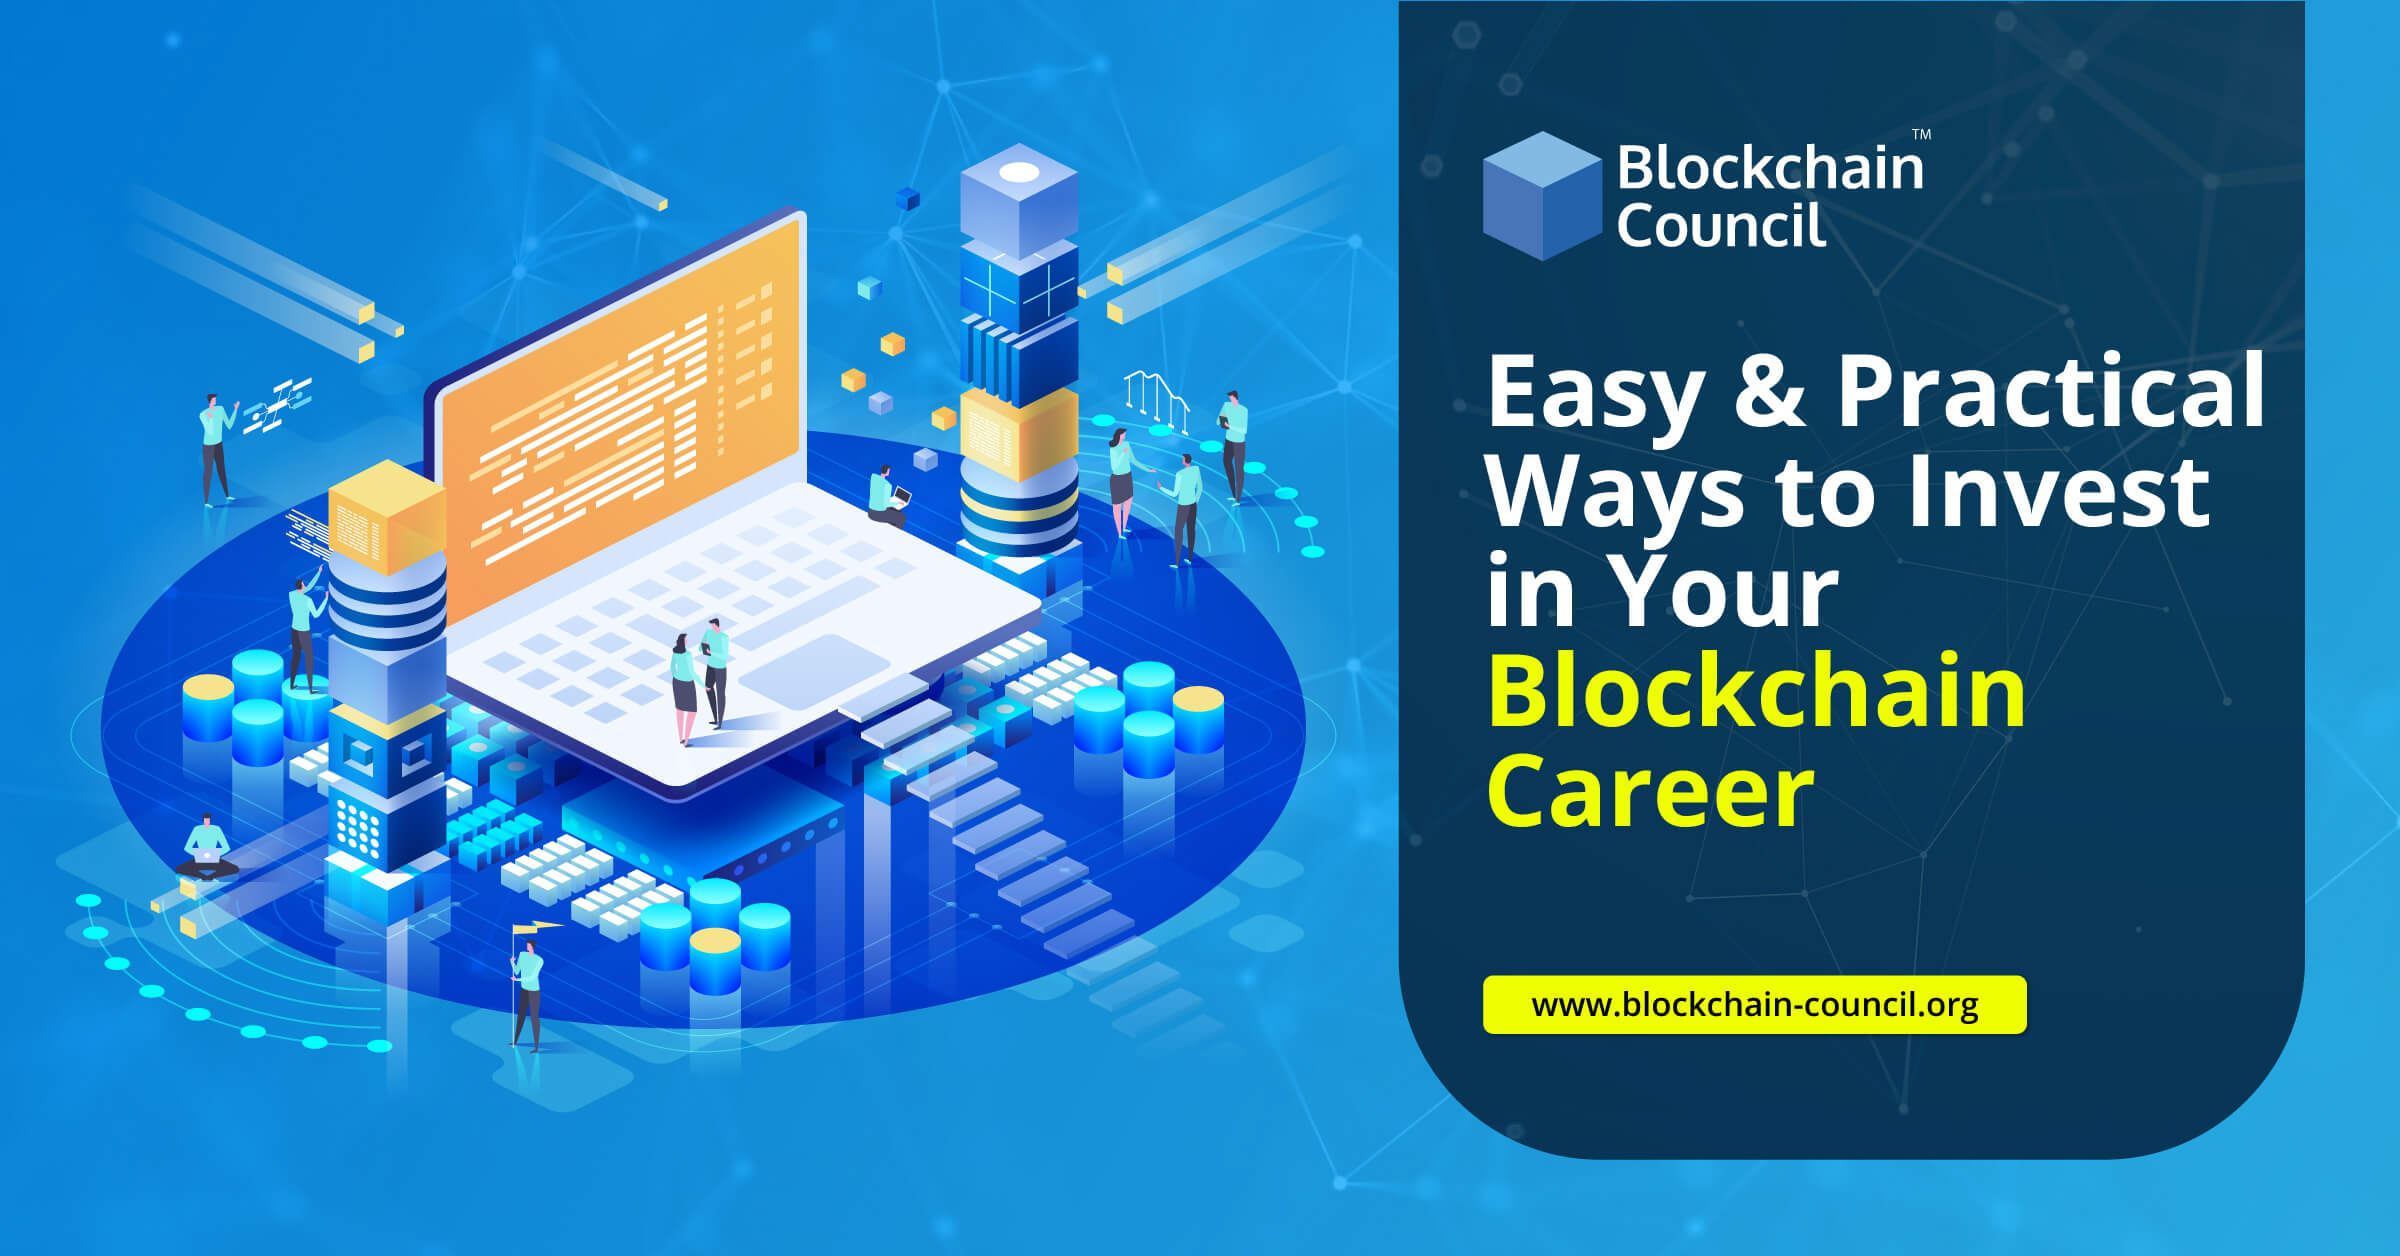 Easy-&-Practical-Ways-to-Invest-in-Your-Blockchain-Career